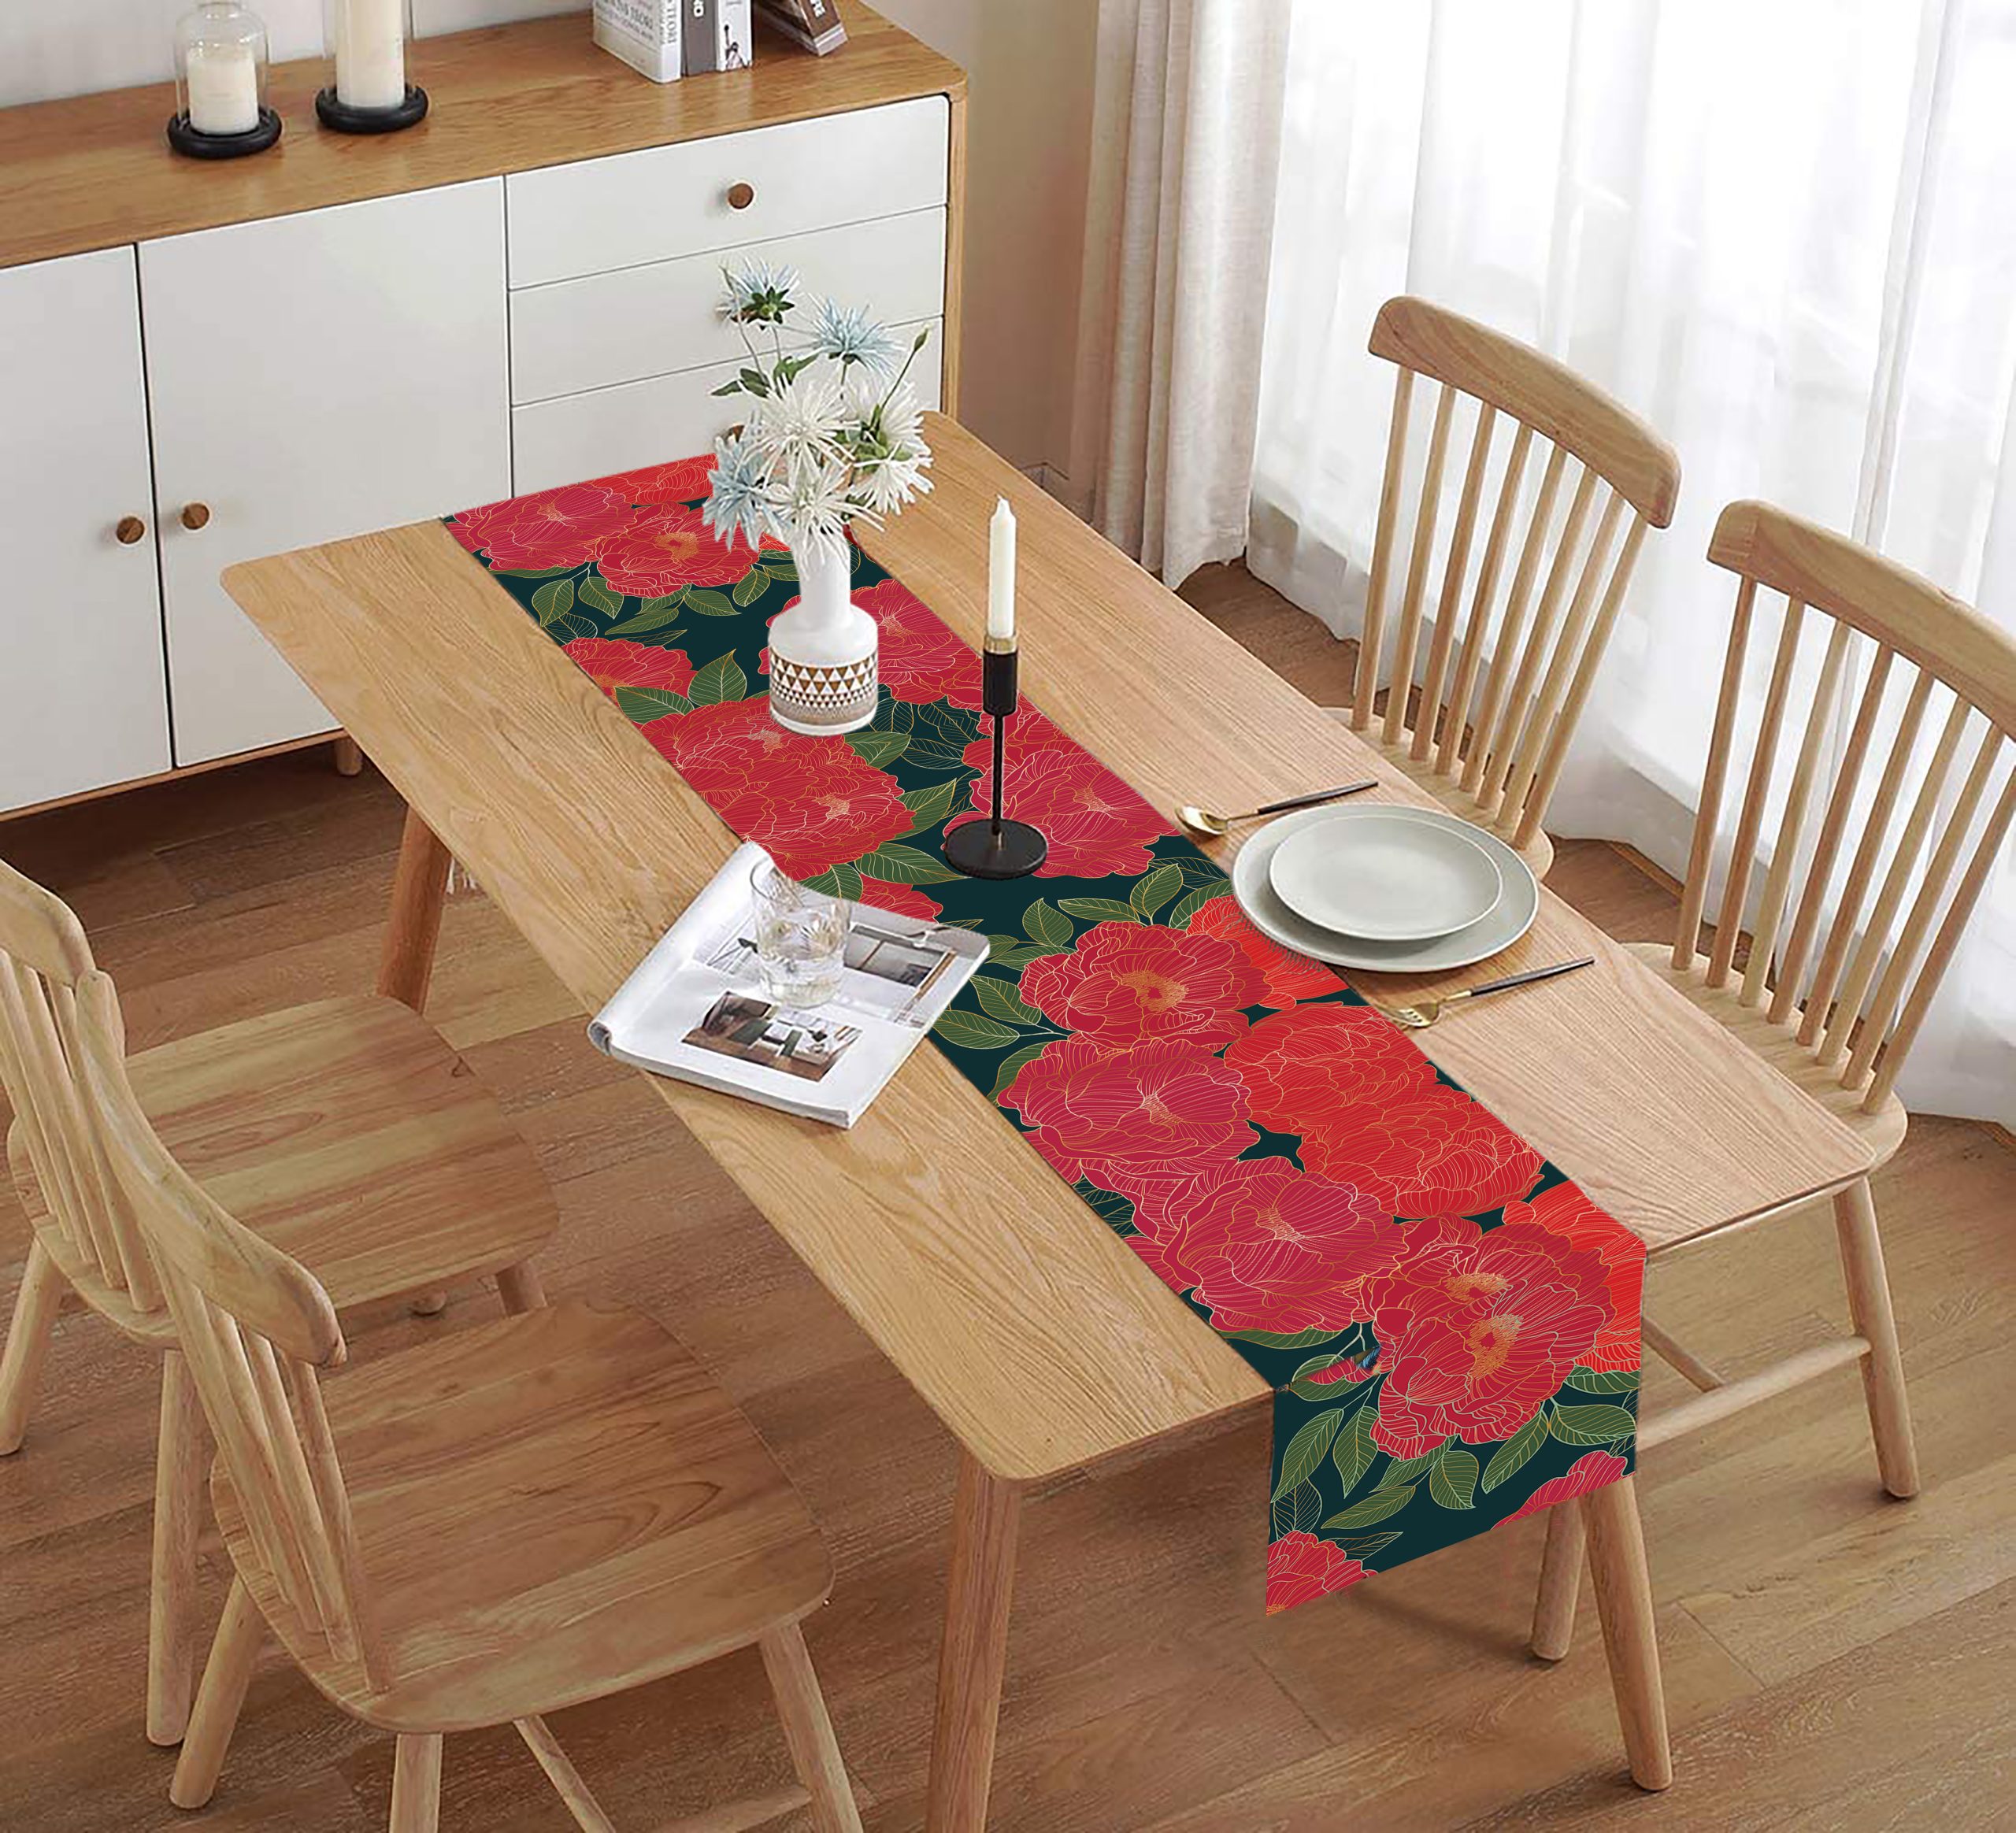 Homewards Green and Red Peony Flower Design Table Runner